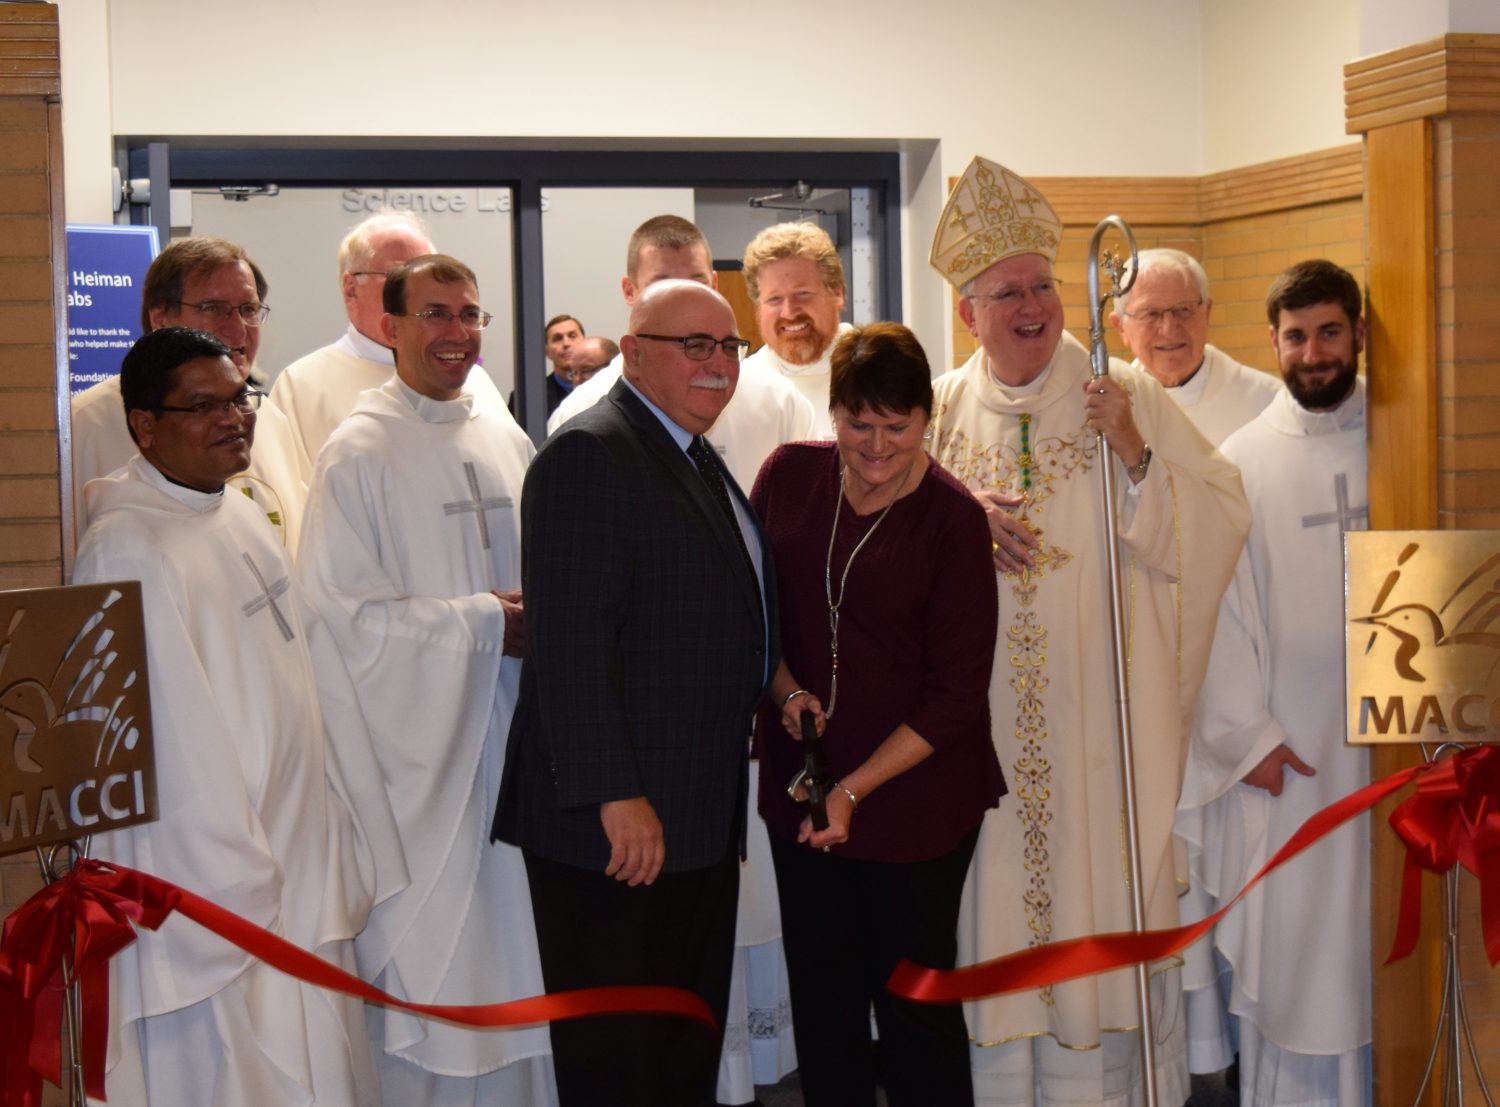 Joellen Heiman (front row, center) snips the ribbon to commemorate the grand opening of the Ken & Joellen Heiman Science Labs at Columbus Catholic High School on Oct. 27.